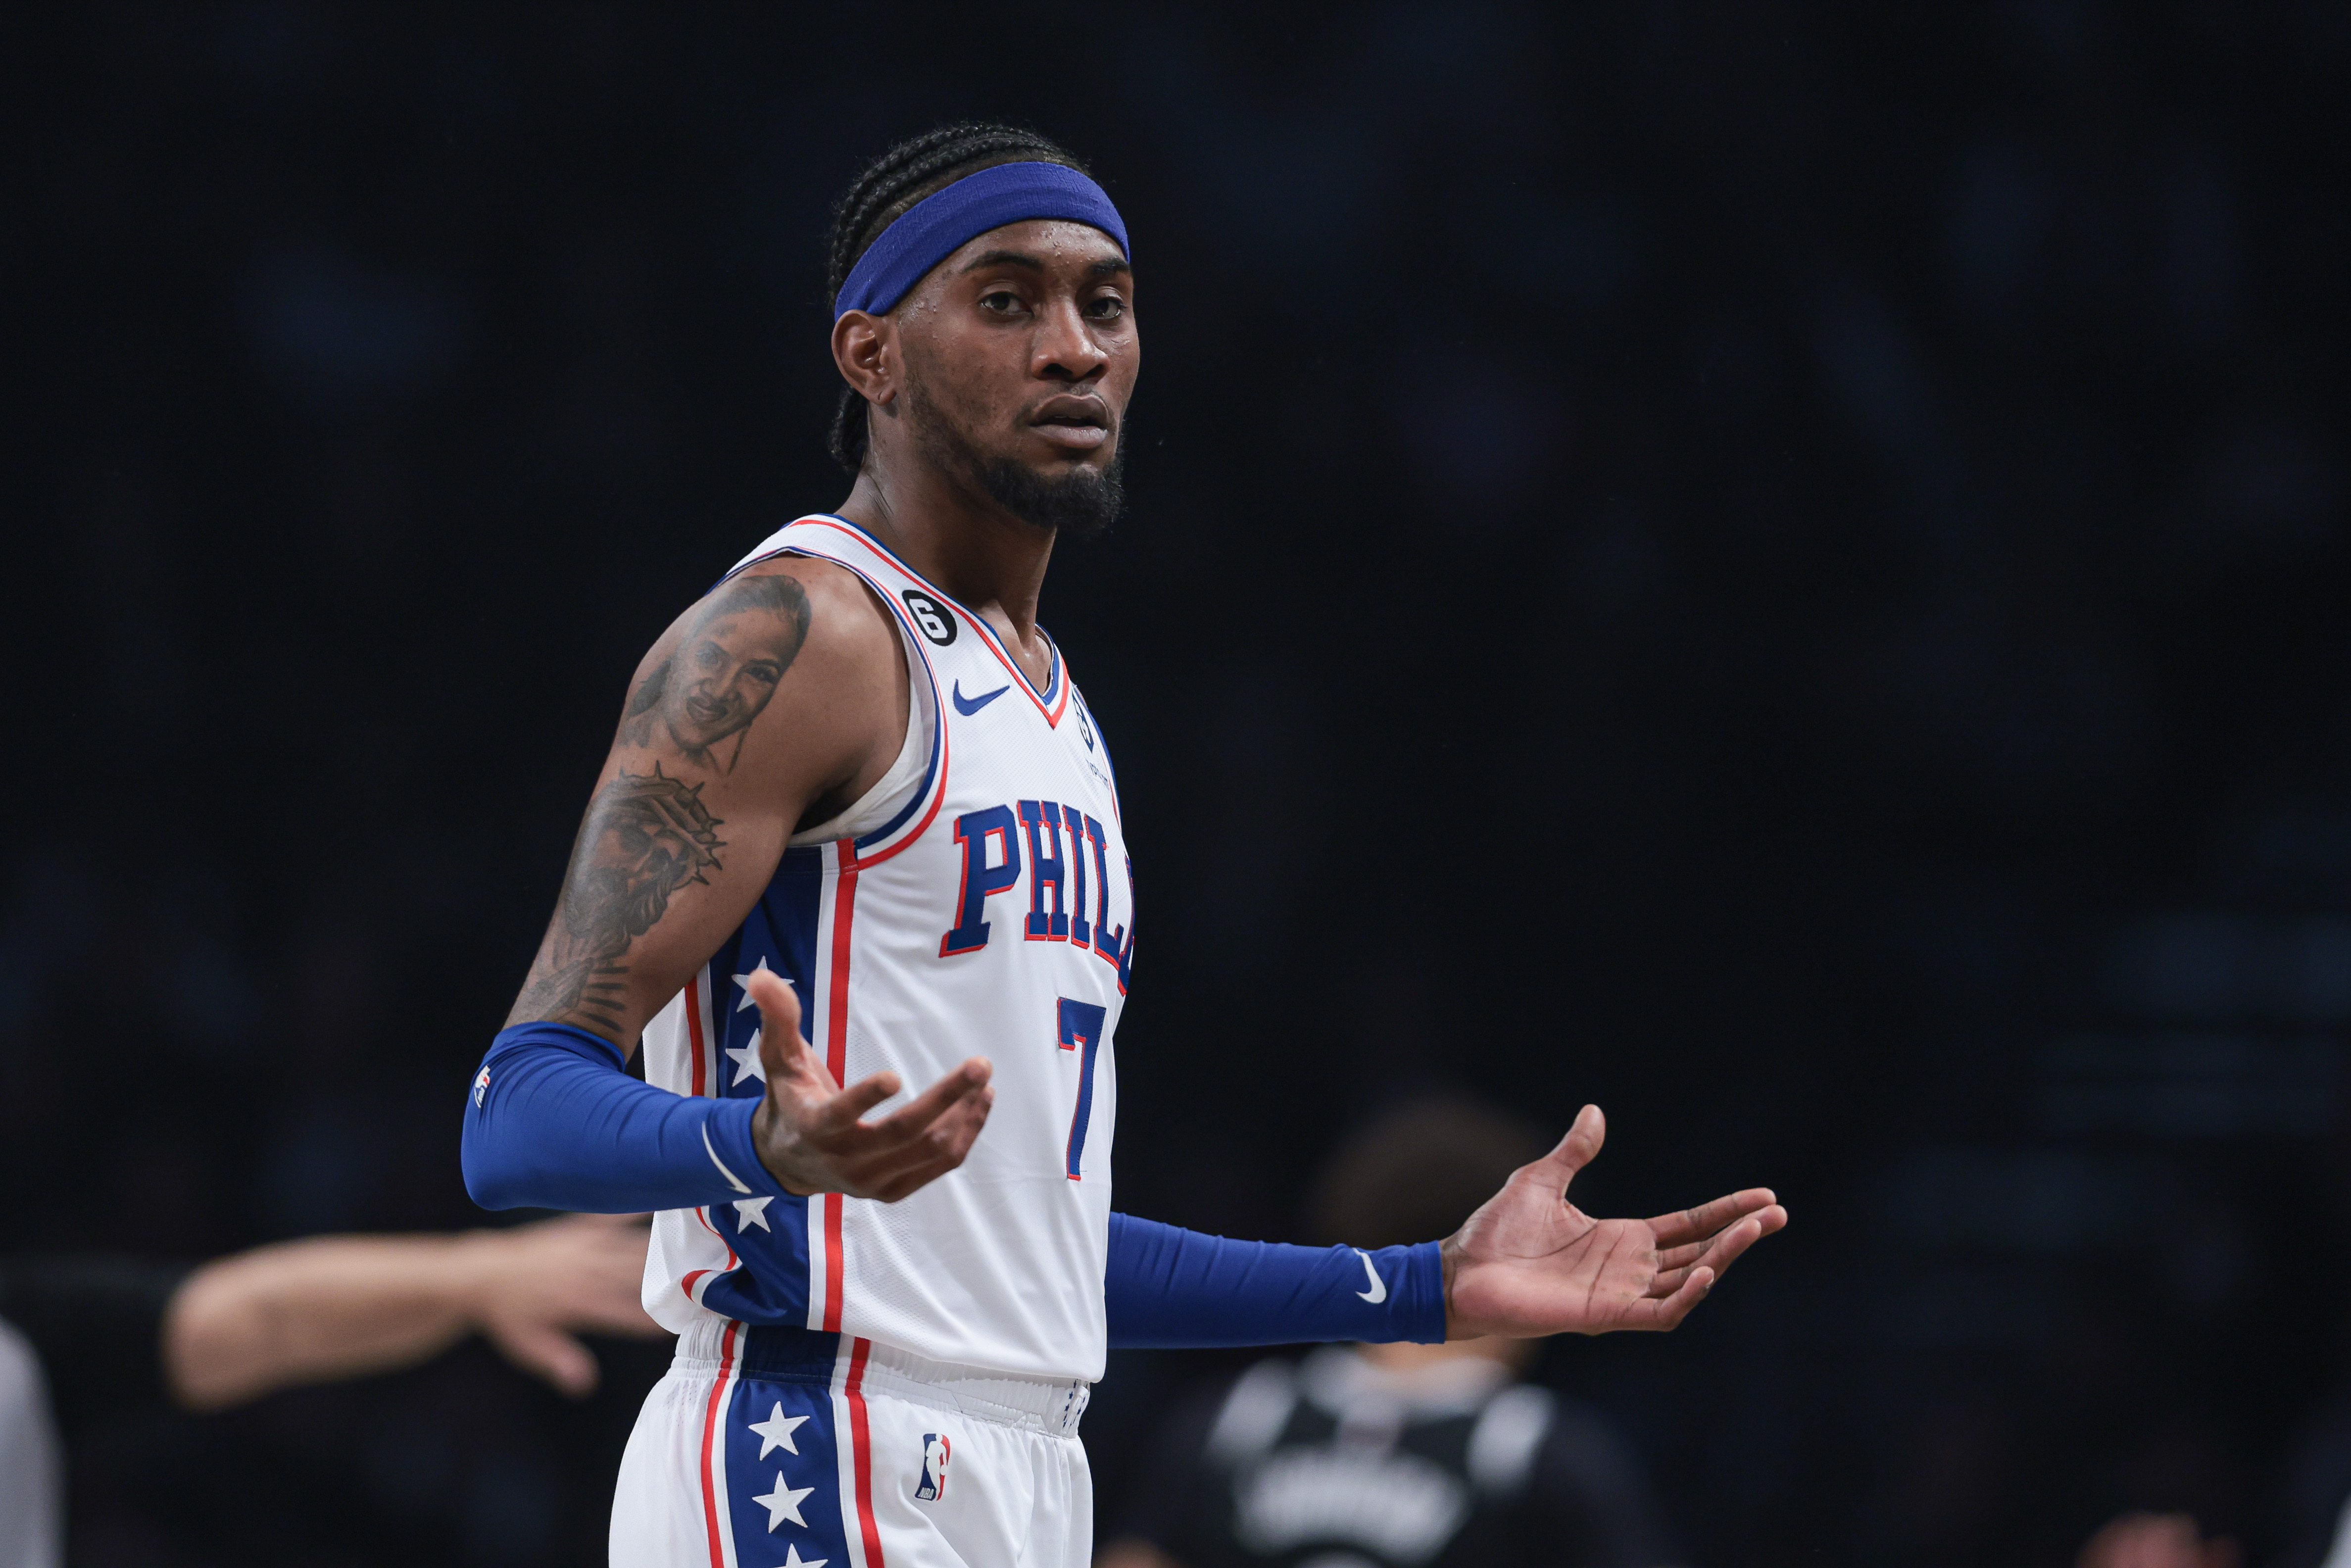 Sixers complete sweep of Nets behind dominant performance by Tobias Harris